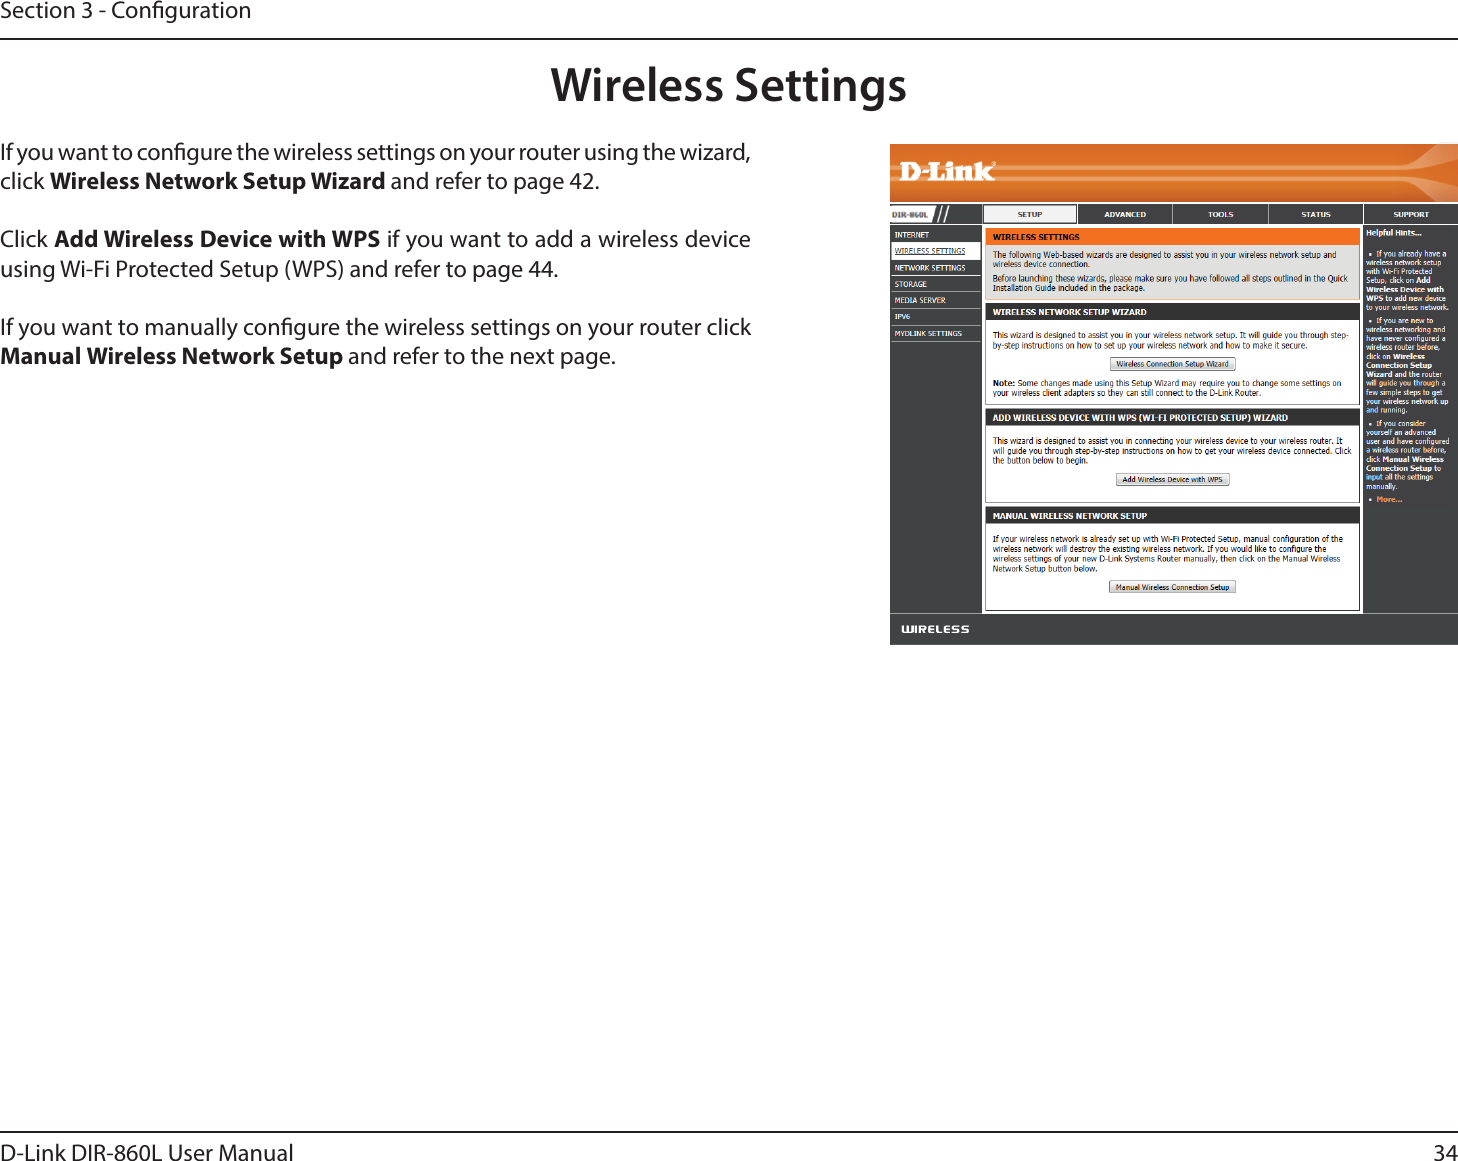 34D-Link DIR-860L User ManualSection 3 - CongurationWireless SettingsIf you want to congure the wireless settings on your router using the wizard, click 8JSFMFTT/FUXPSL4FUVQ8J[BSEand refer to page 42.Click &quot;EE8JSFMFTT%FWJDFXJUI814 if you want to add a wireless device using Wi-Fi Protected Setup (WPS) and refer to page 44.If you want to manually congure the wireless settings on your router click Manual Wireless Network Setup and refer to the next page.